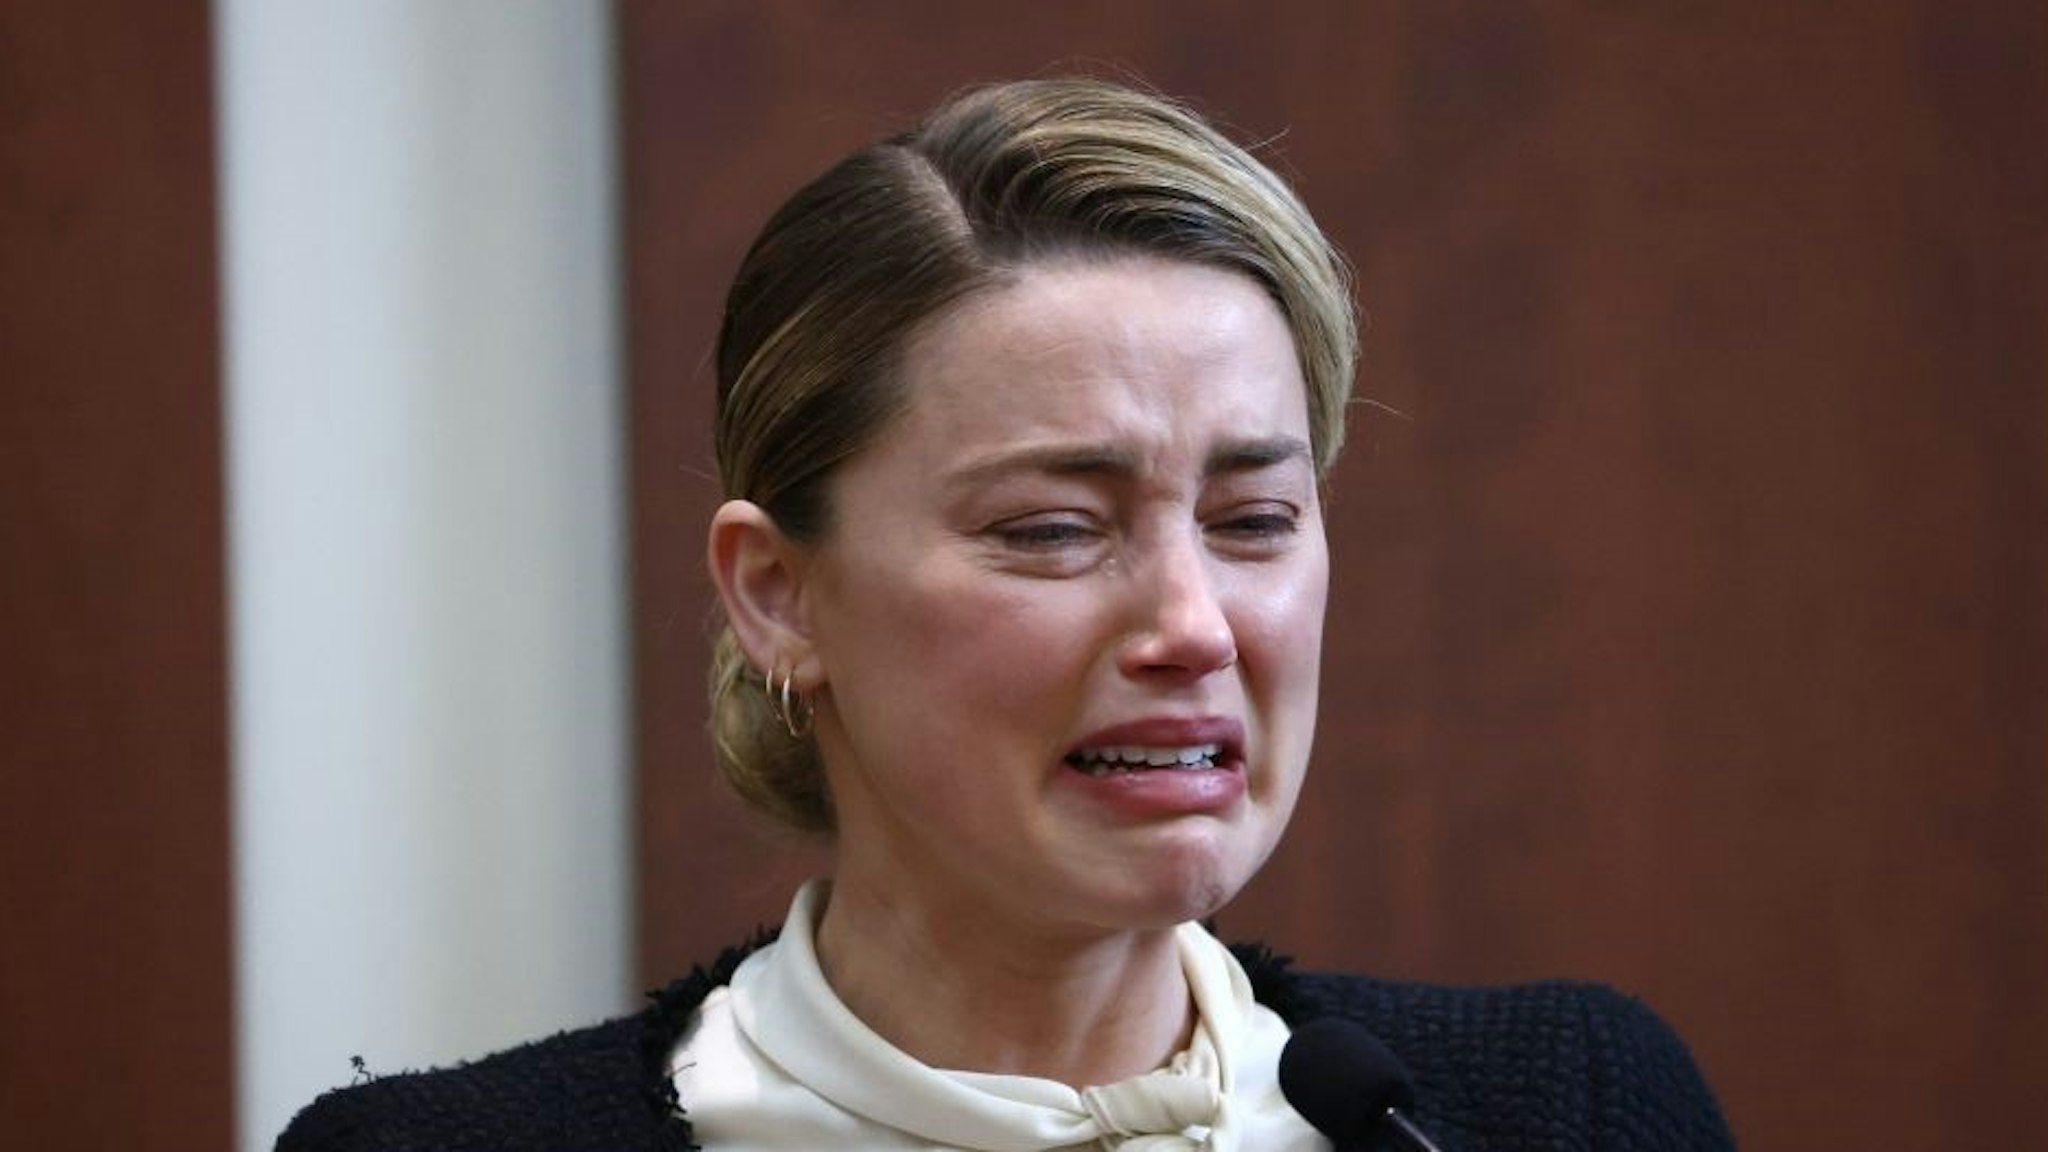 US actress Amber Heard testifies at the Fairfax County Circuit Courthouse in Fairfax, Virginia, on May 5, 2022. - Actor Johnny Depp is suing ex-wife Amber Heard for libel after she wrote an op-ed piece in The Washington Post in 2018 referring to herself as a public figure representing domestic abuse. (Photo by Jim LO SCALZO / POOL / AFP) (Photo by